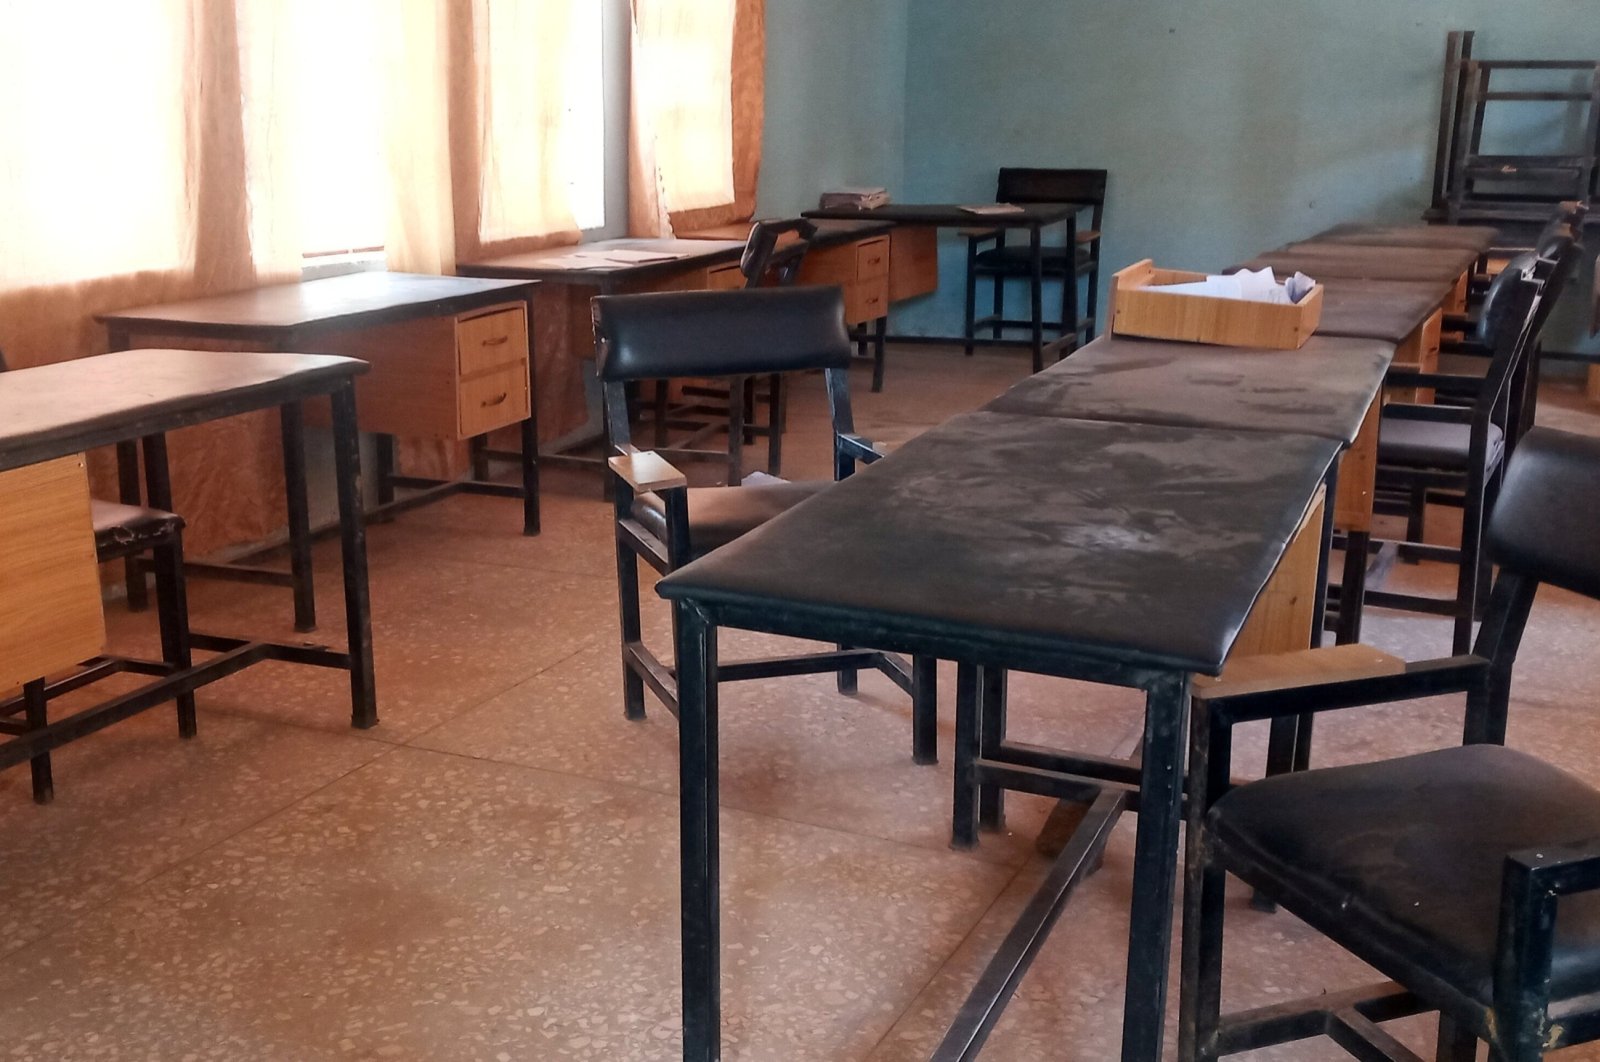 A classroom at the Government Science secondary school in Kankara district remains empty after an attack by armed bandits, in northwestern Katsina State, Nigeria, Dec. 12, 2020. (Reuters File Photo)